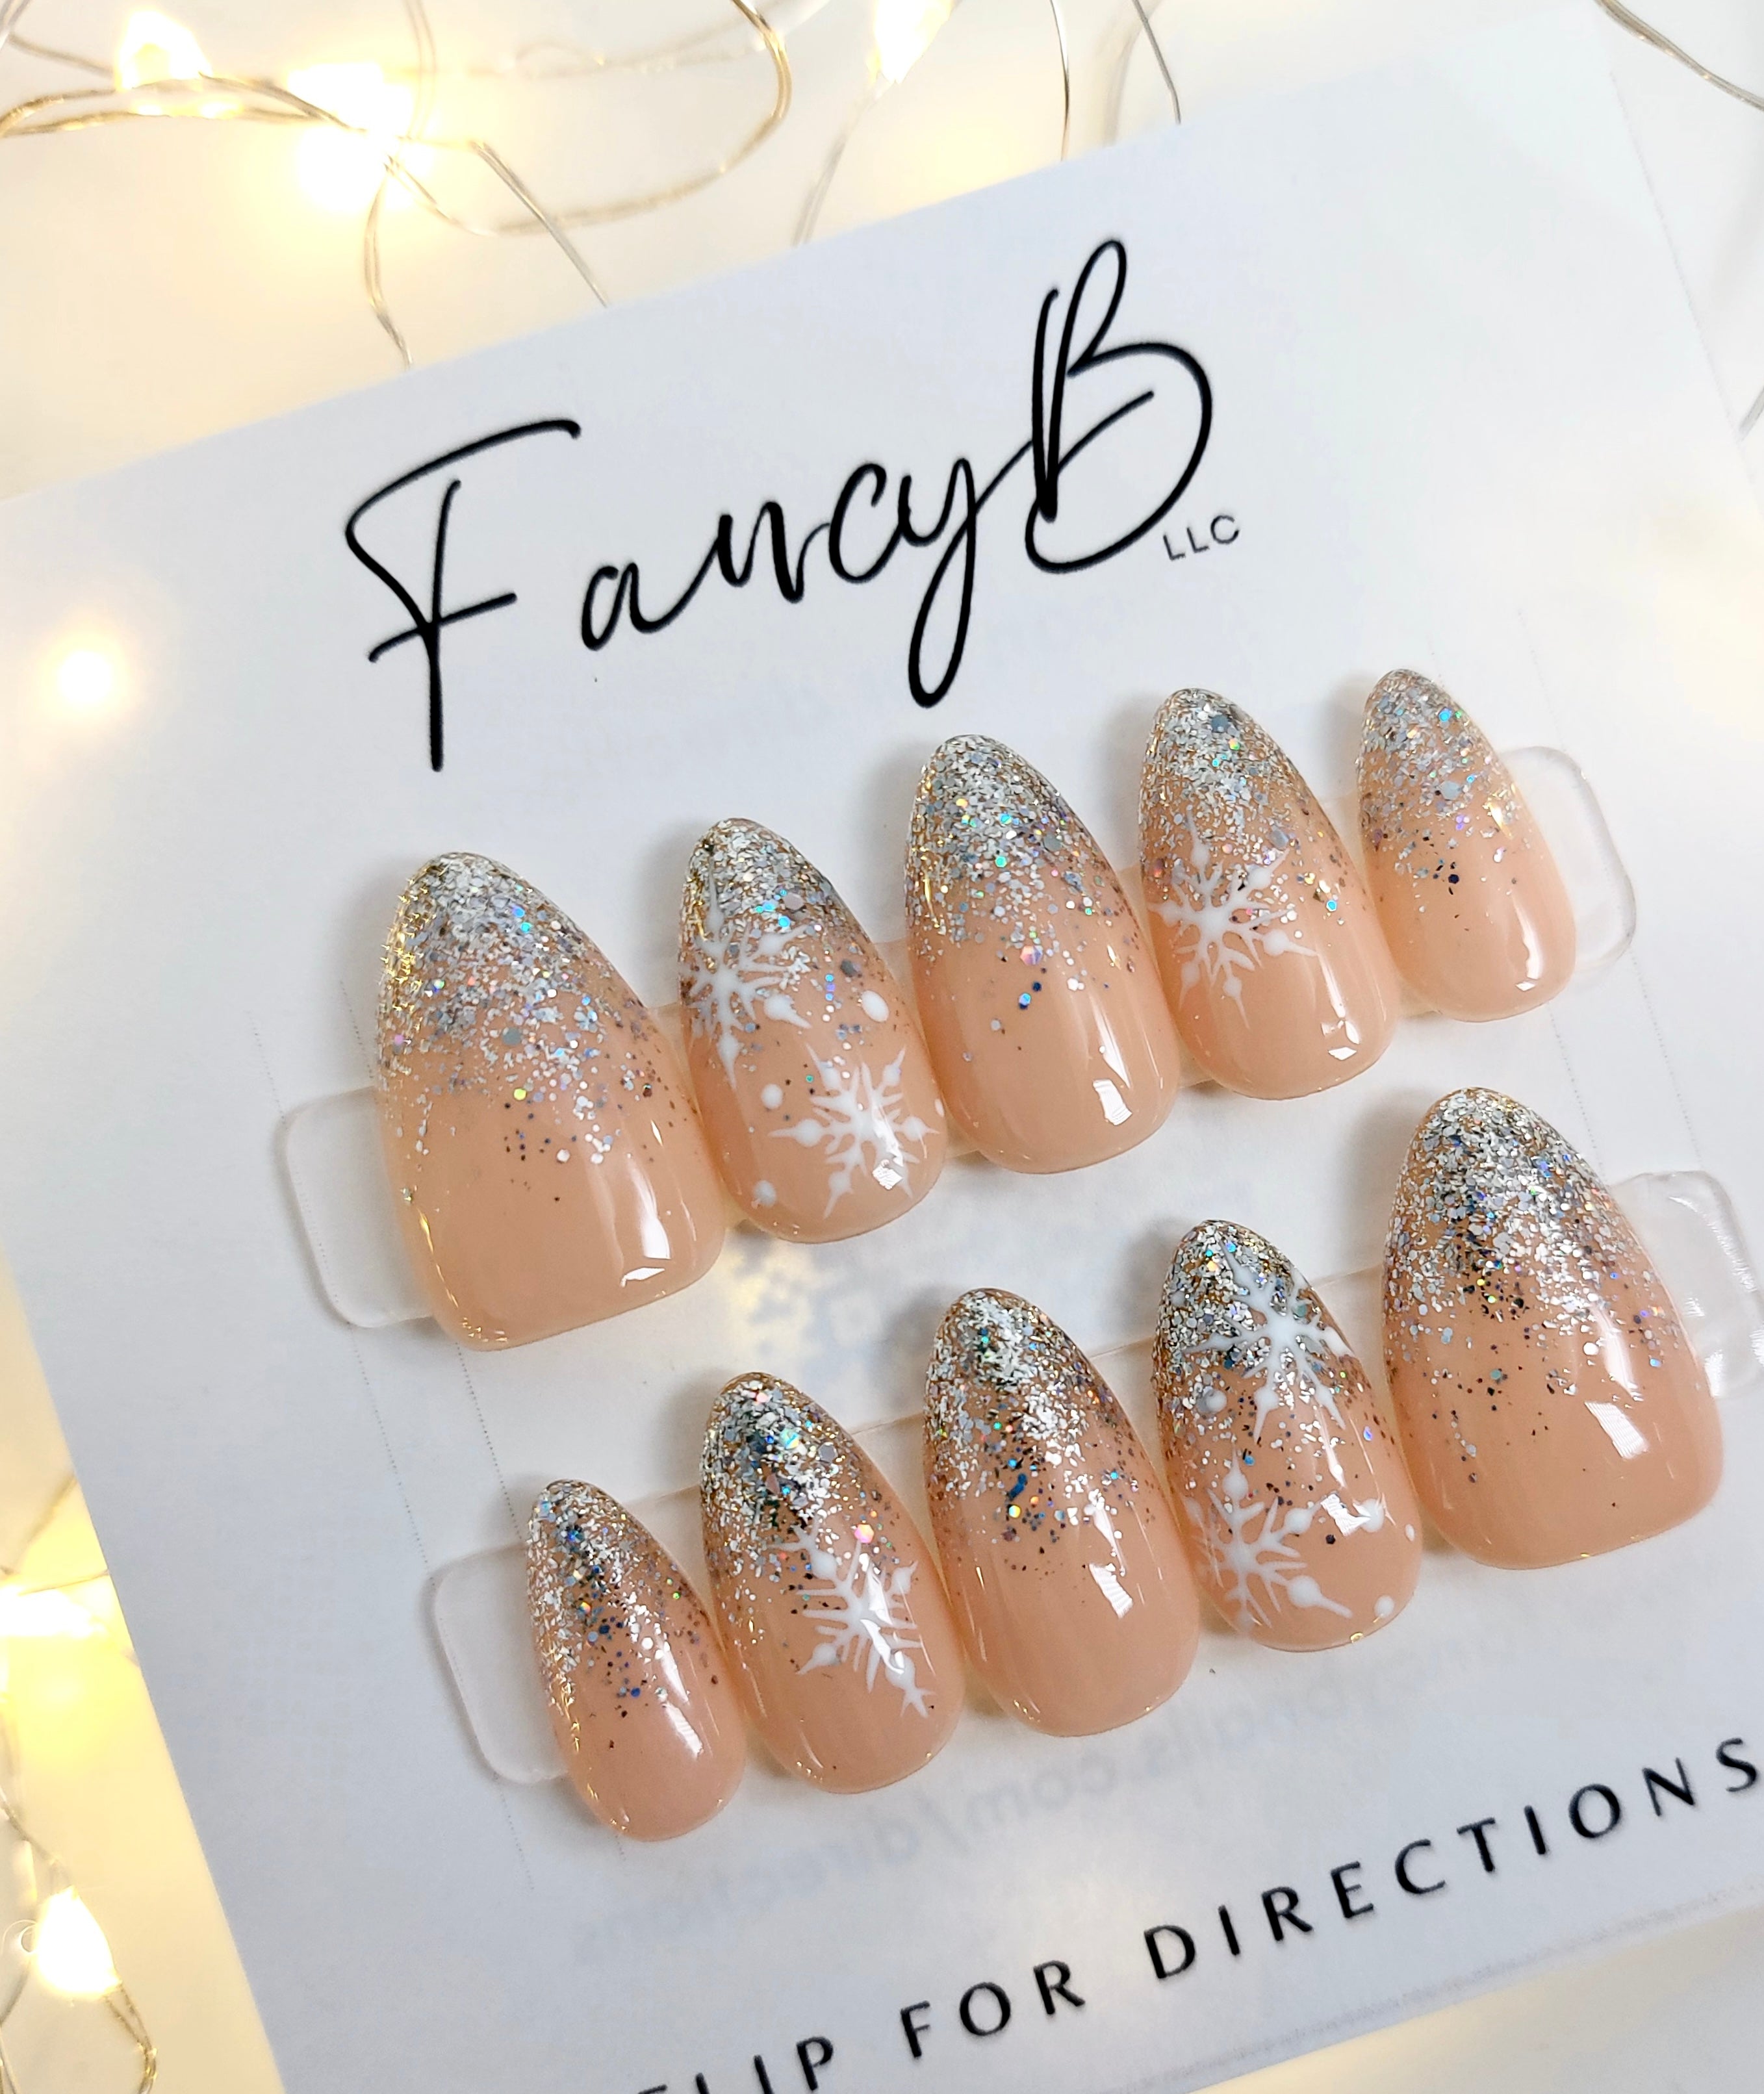 Custom press on nails with nude color, silver glitter ombre tips and hand painted snowflake designs on a short almond shape. FancyB Nails.